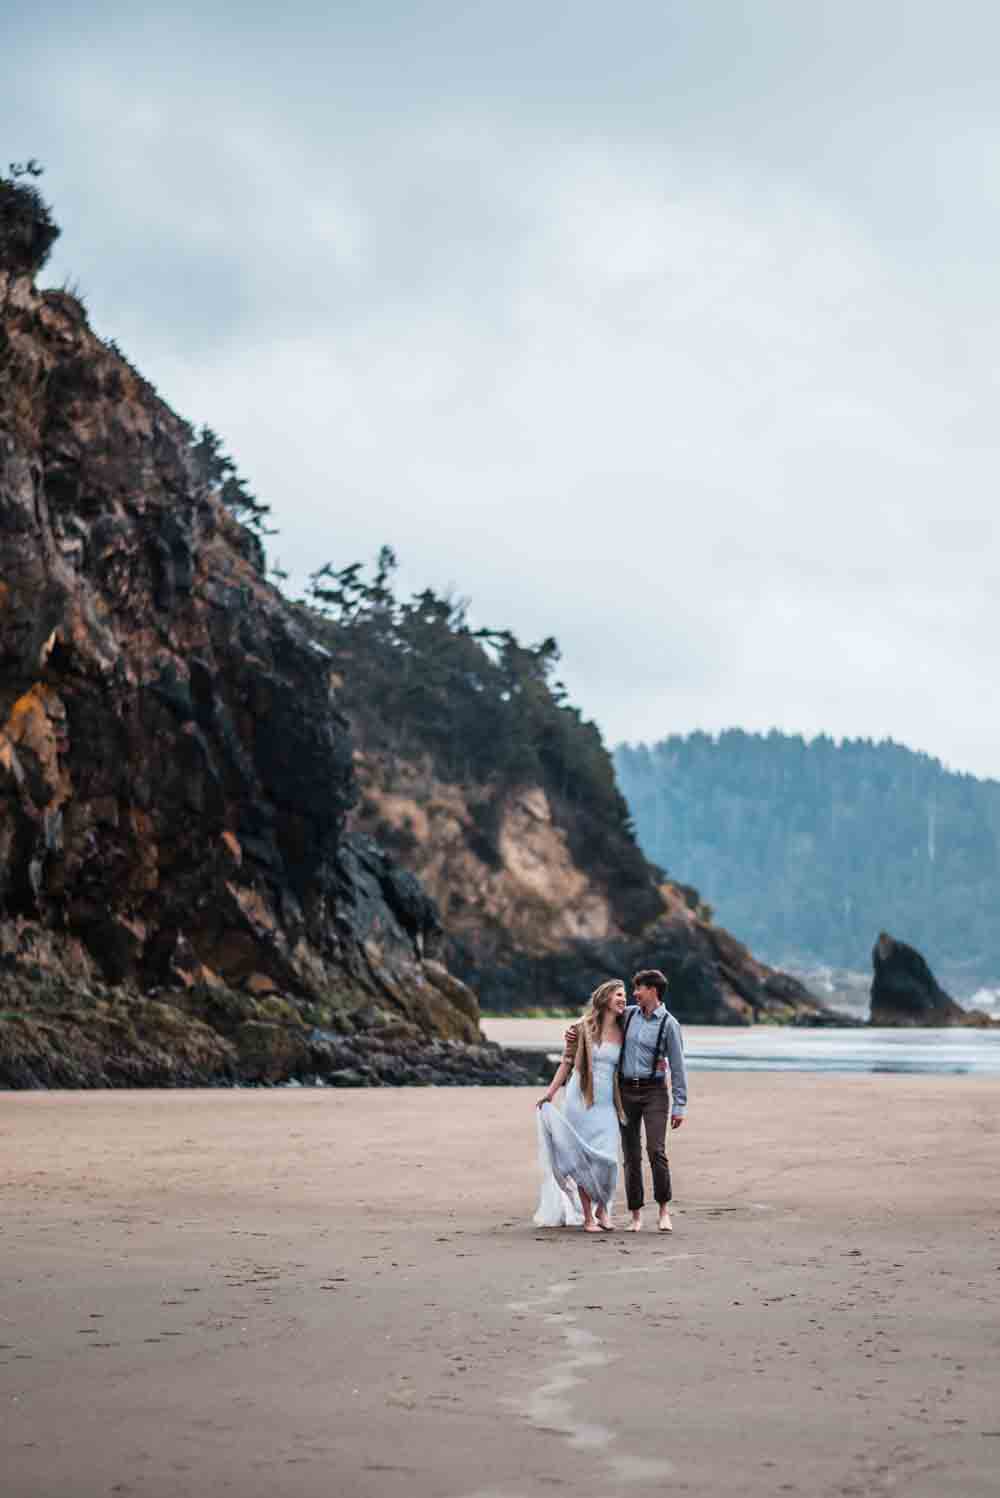 A couple on a beach coast with cliffs in the background